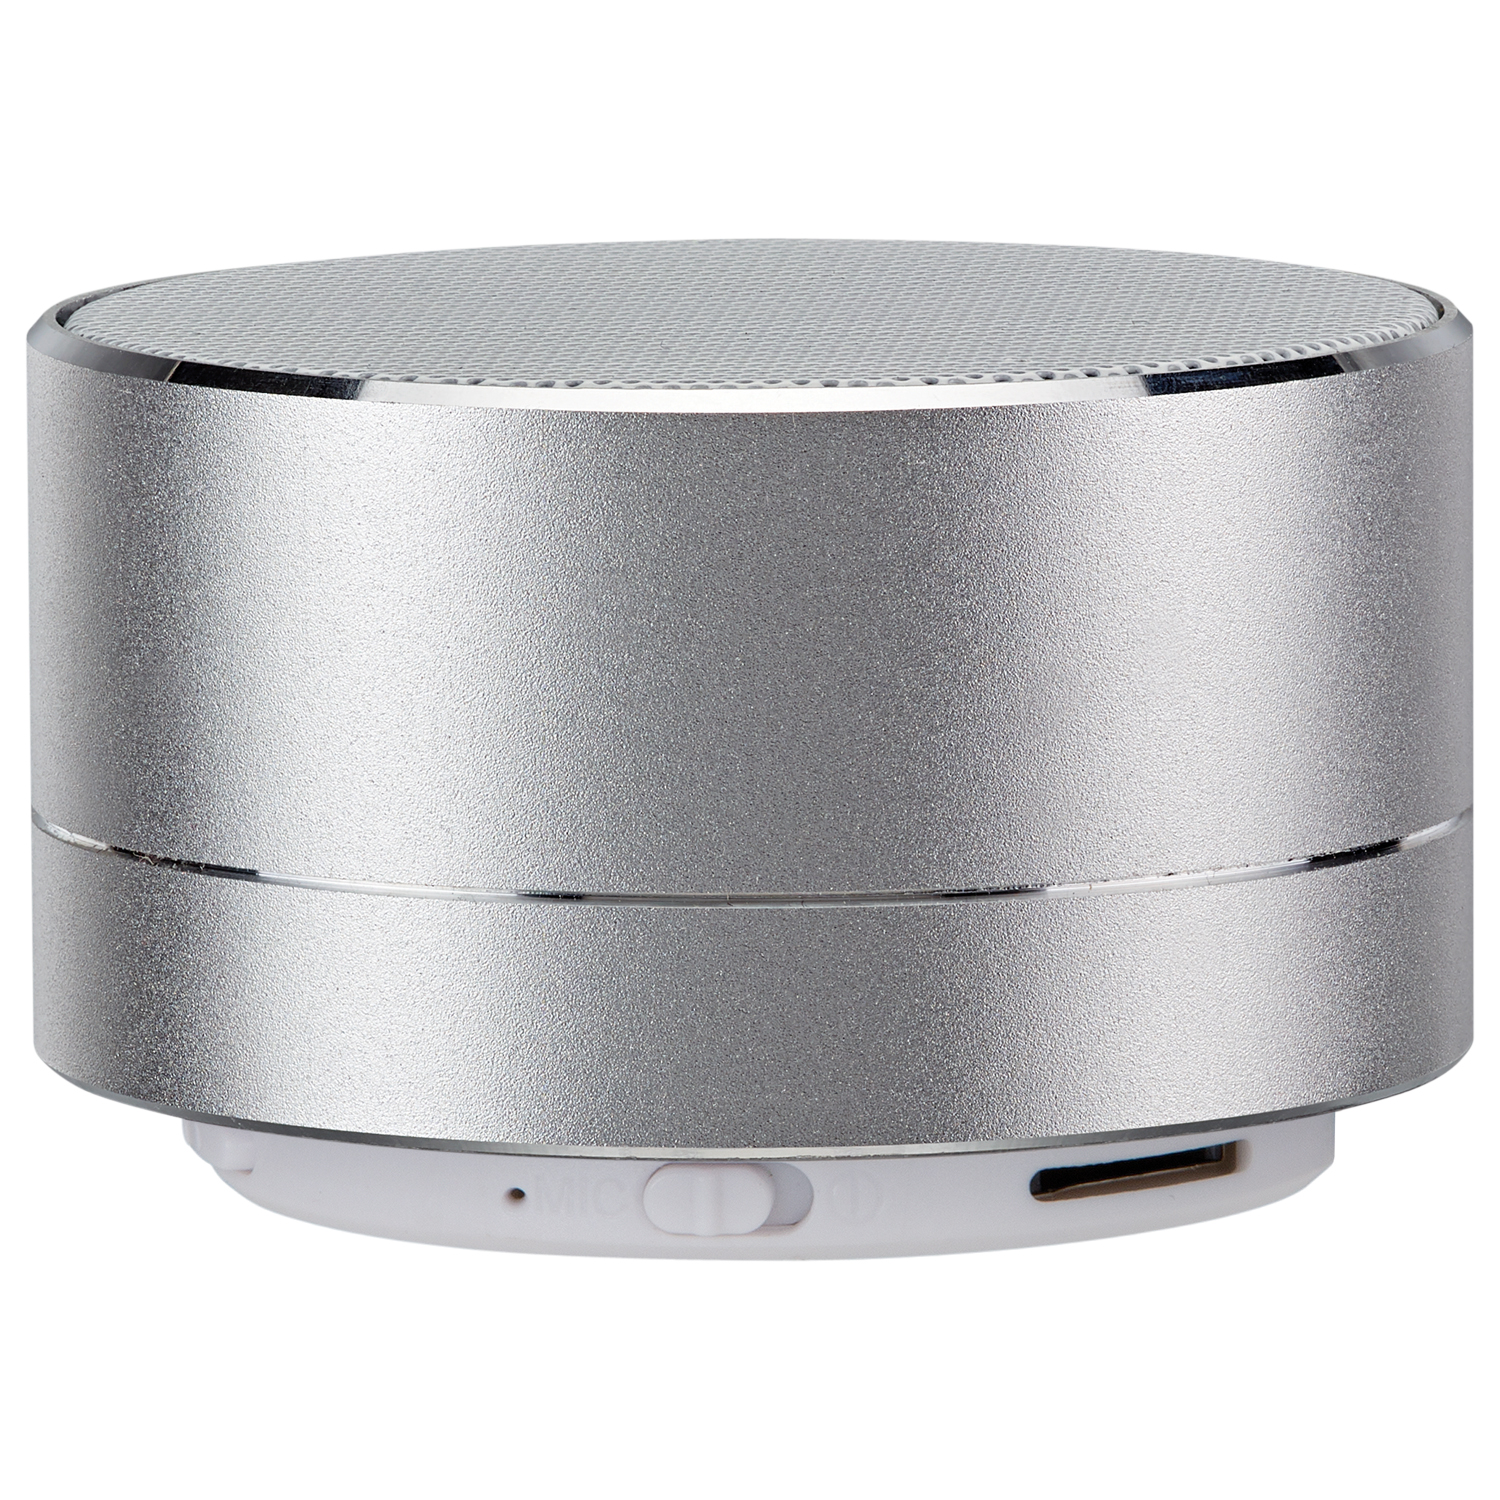 iLive Portable Bluetooth Speaker, Silver, ISB08 - image 3 of 6